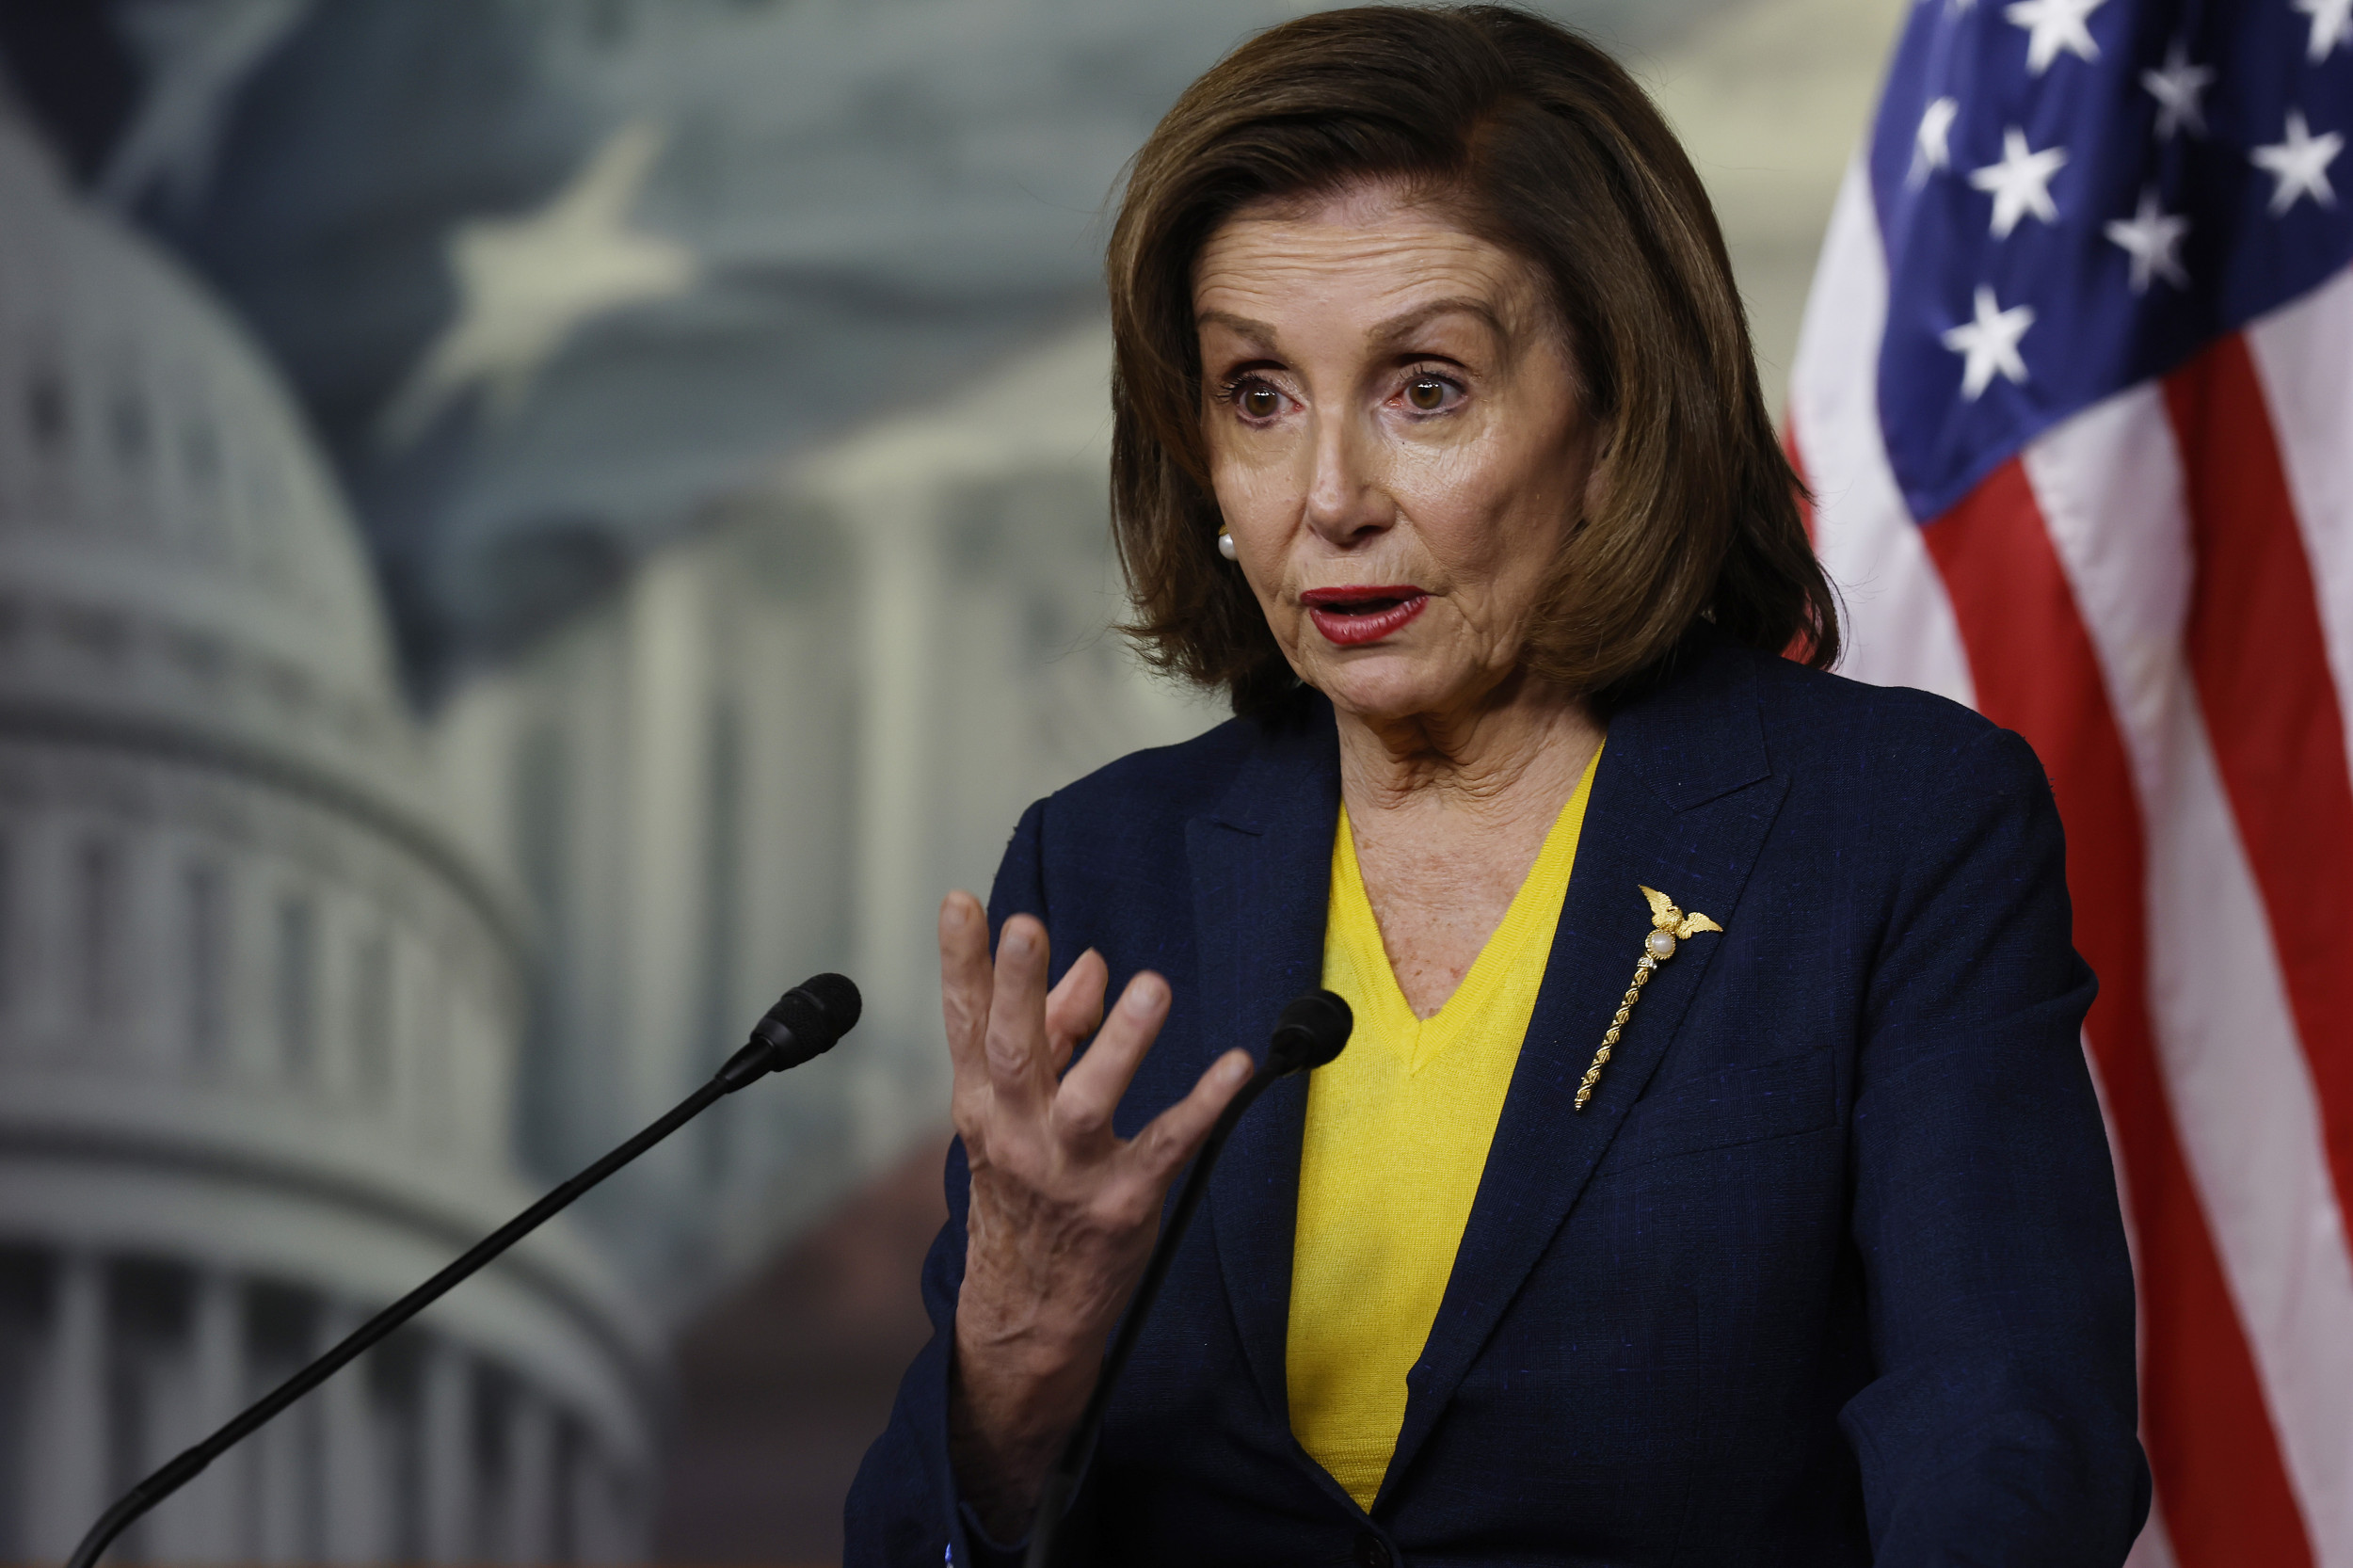 Pelosi Opposes Ban on Lawmakers Trading Stocks as Her Family Makes